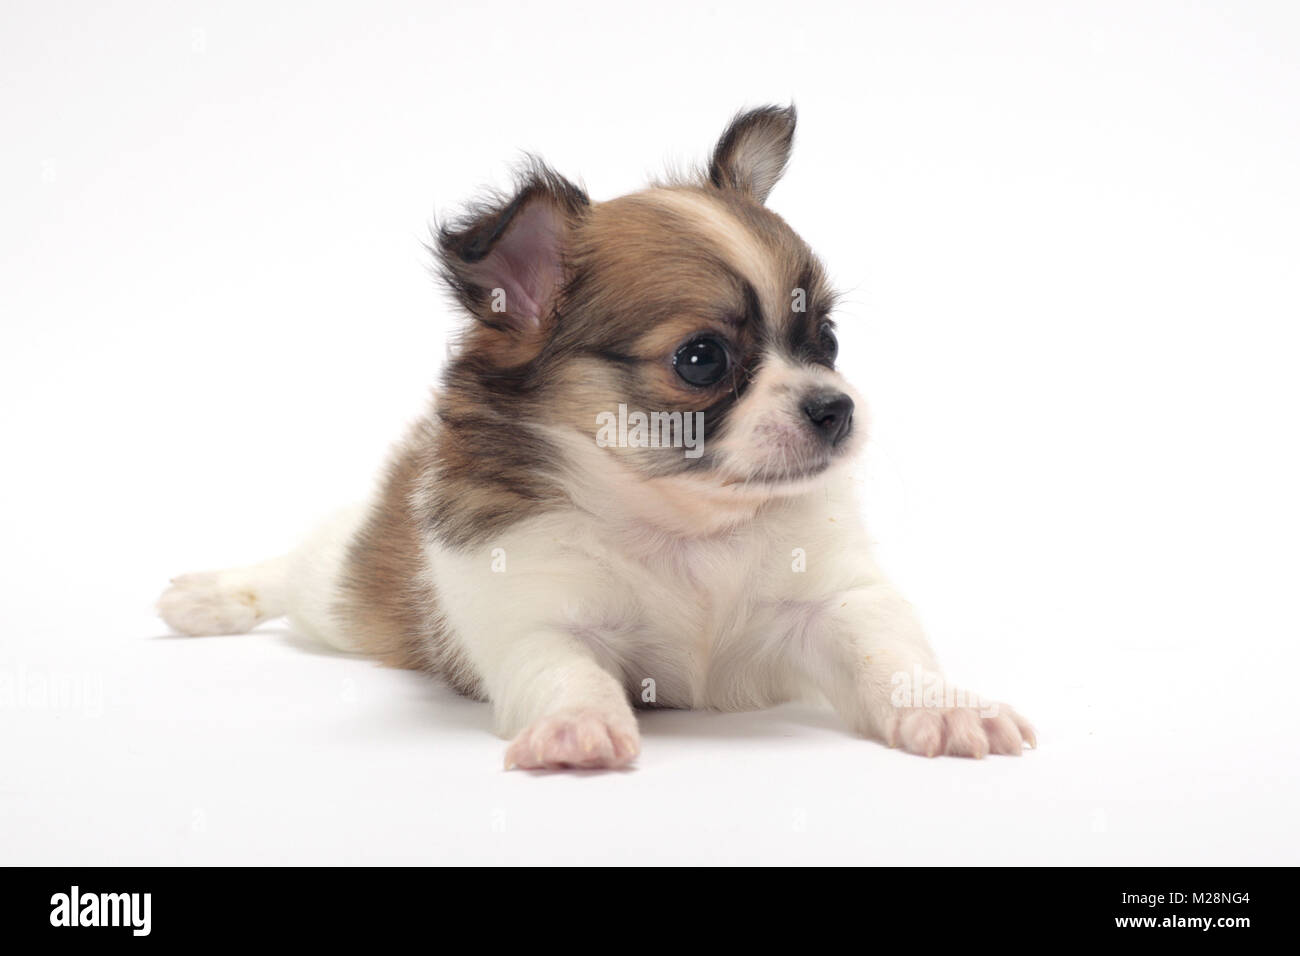 Cute Longhaired Chihuahua Puppy On White Background Stock